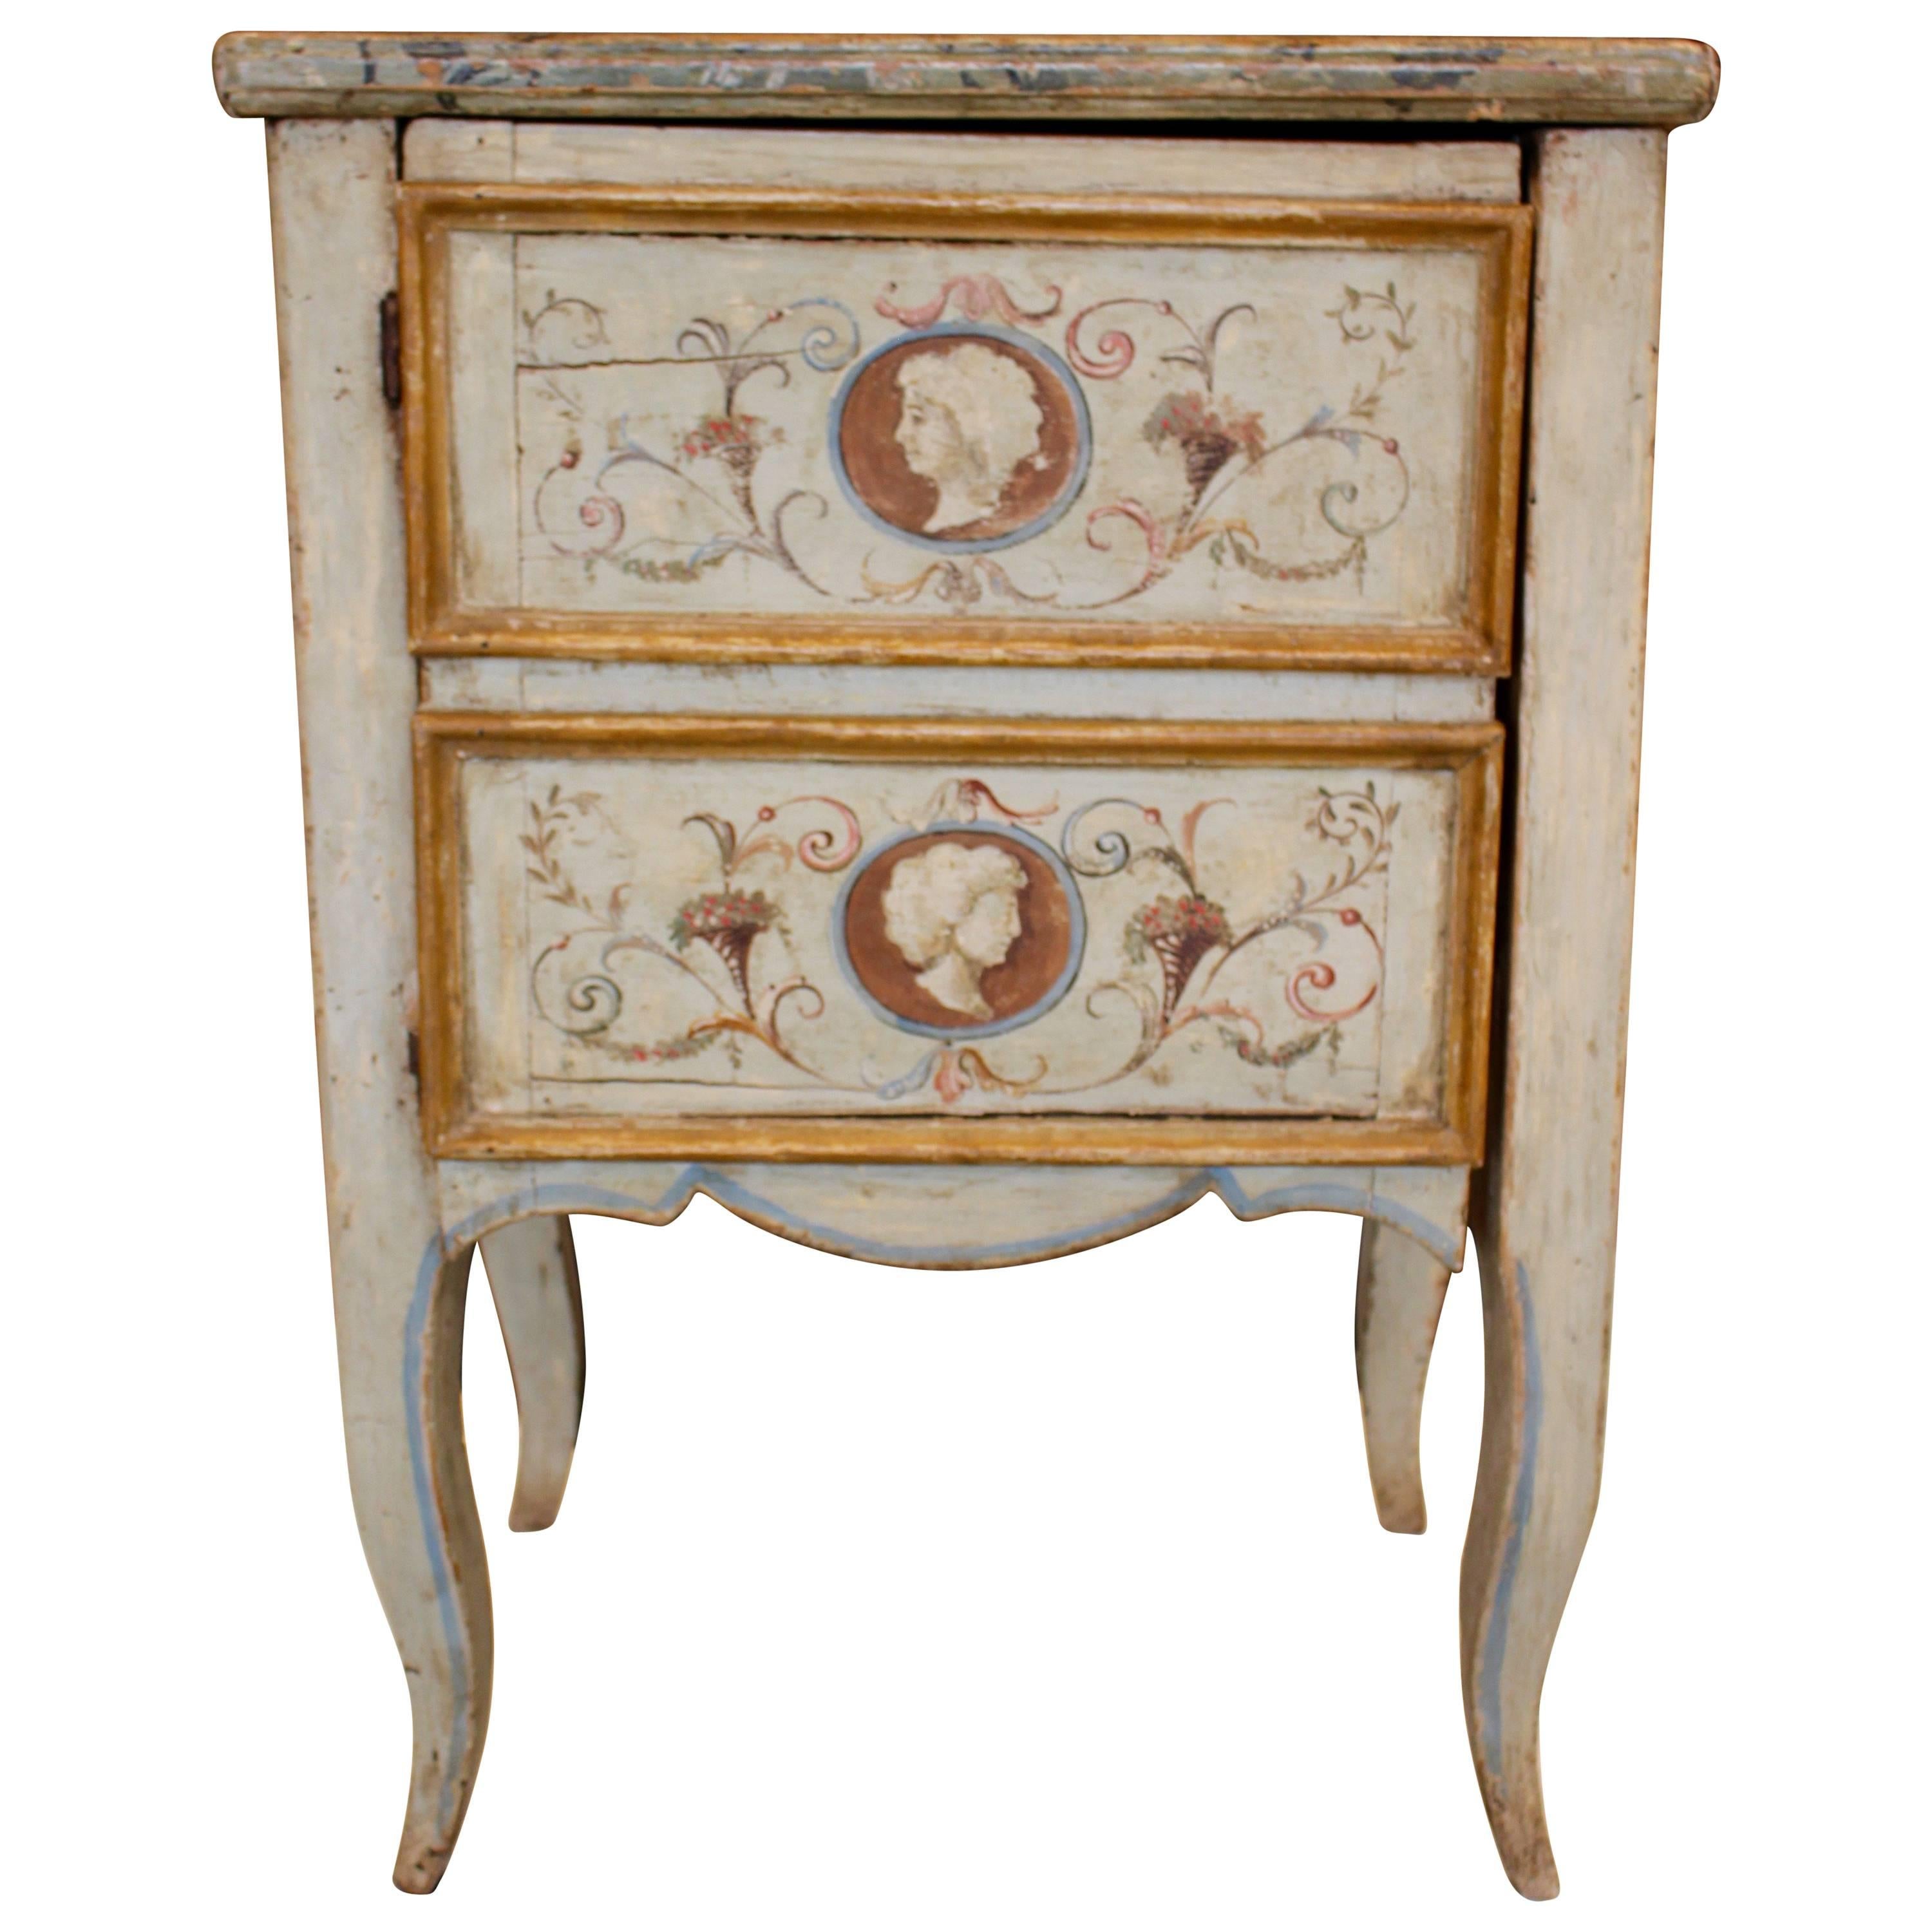 18th century Italian Polychrome Painted and Gilt Chamber Pot Bedside Commode